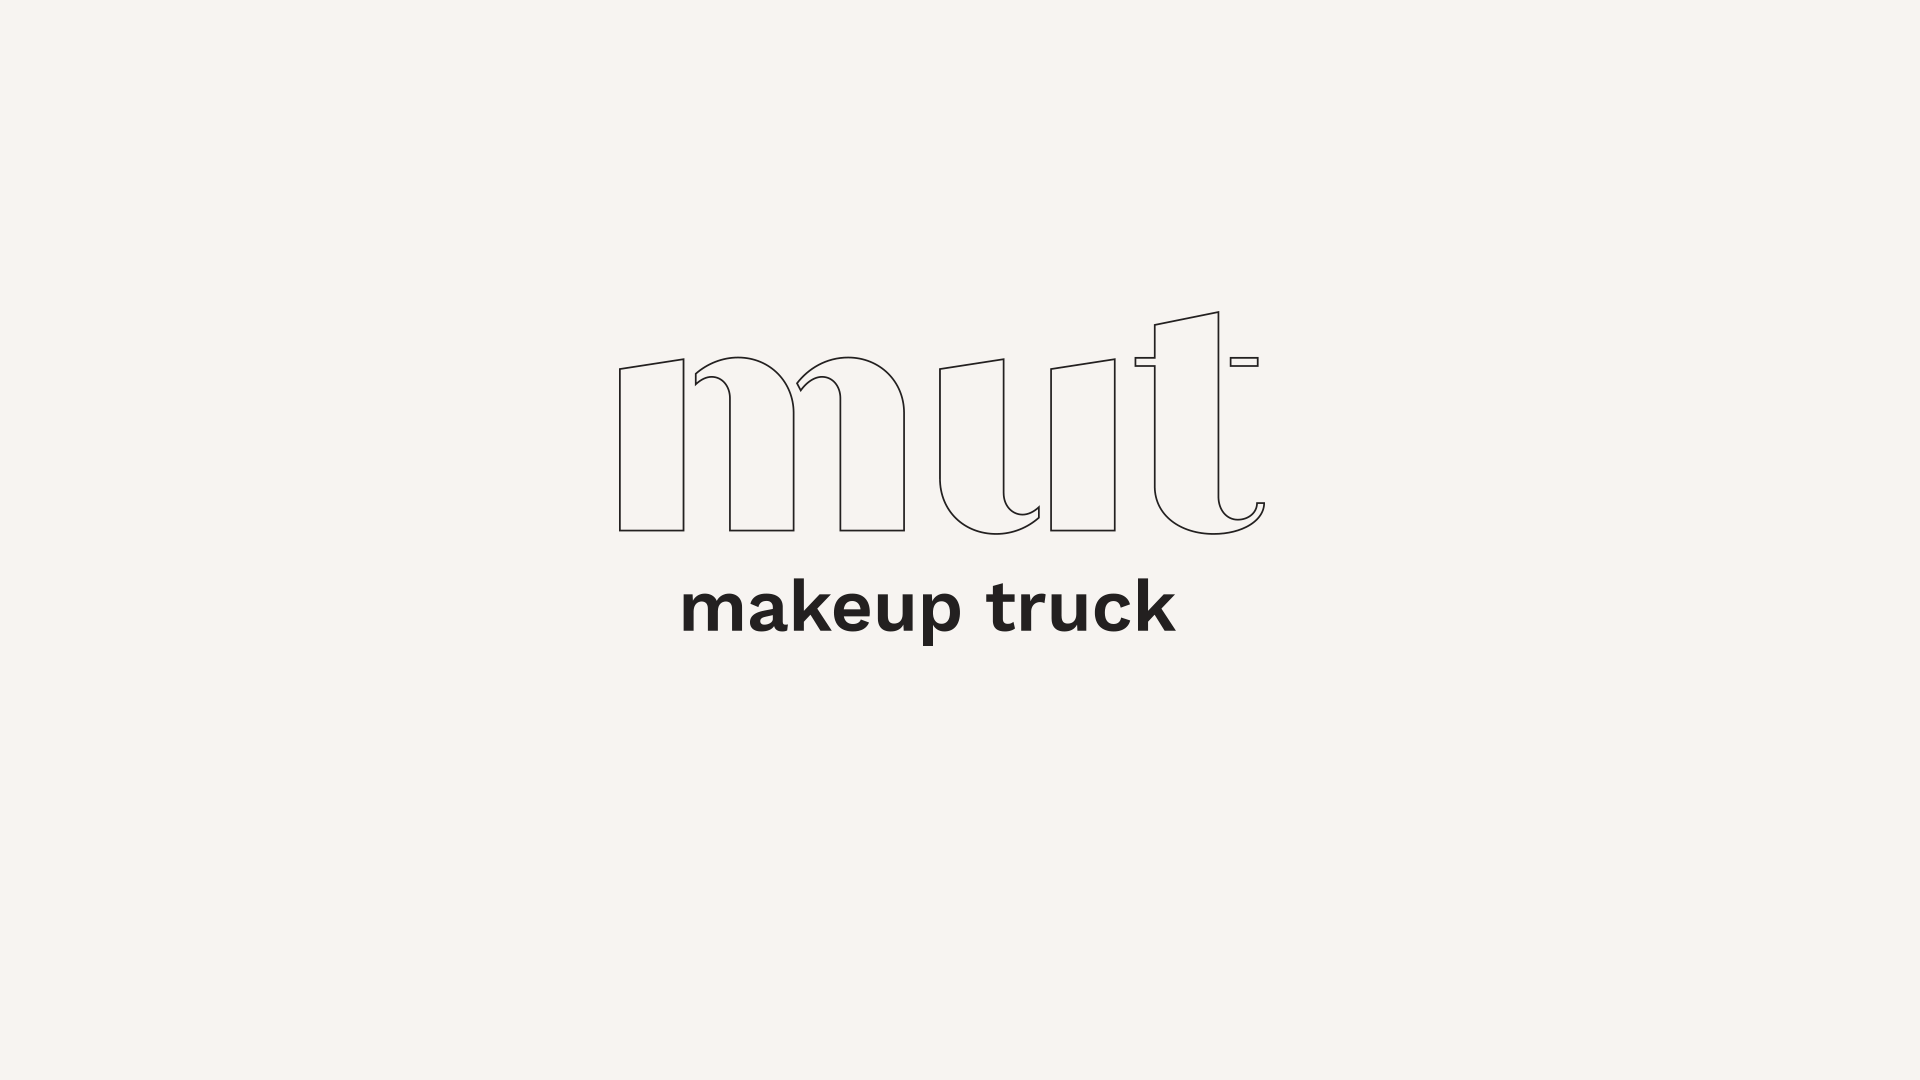 Brand identity for mut, a makeup truck from Buenos Aires, Argentina by FUERA